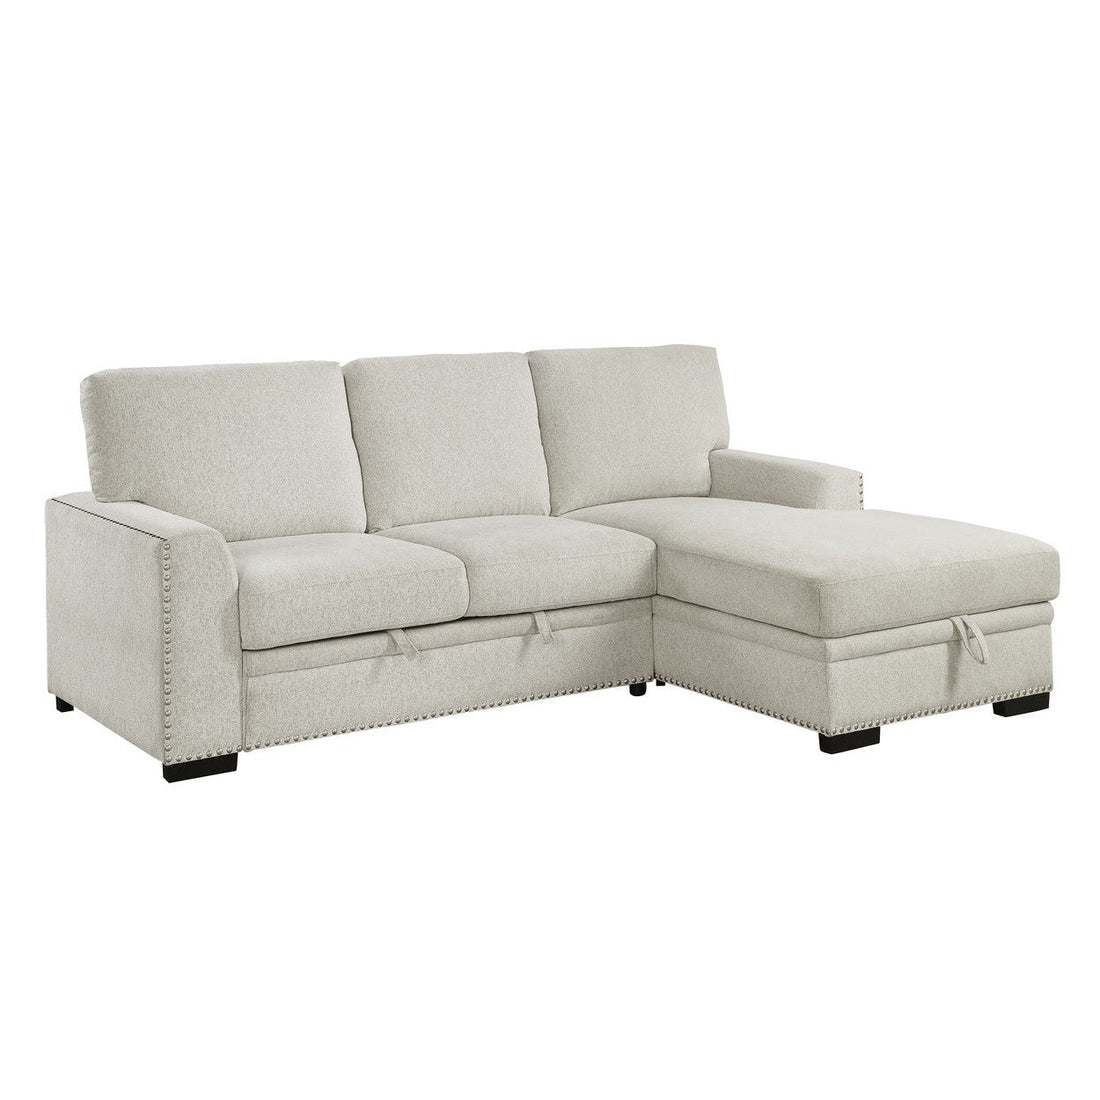 (2)2-Piece Sectional with Pull-out Bed and Right Chaise with Hidden Storage 9468BE*2RC2L